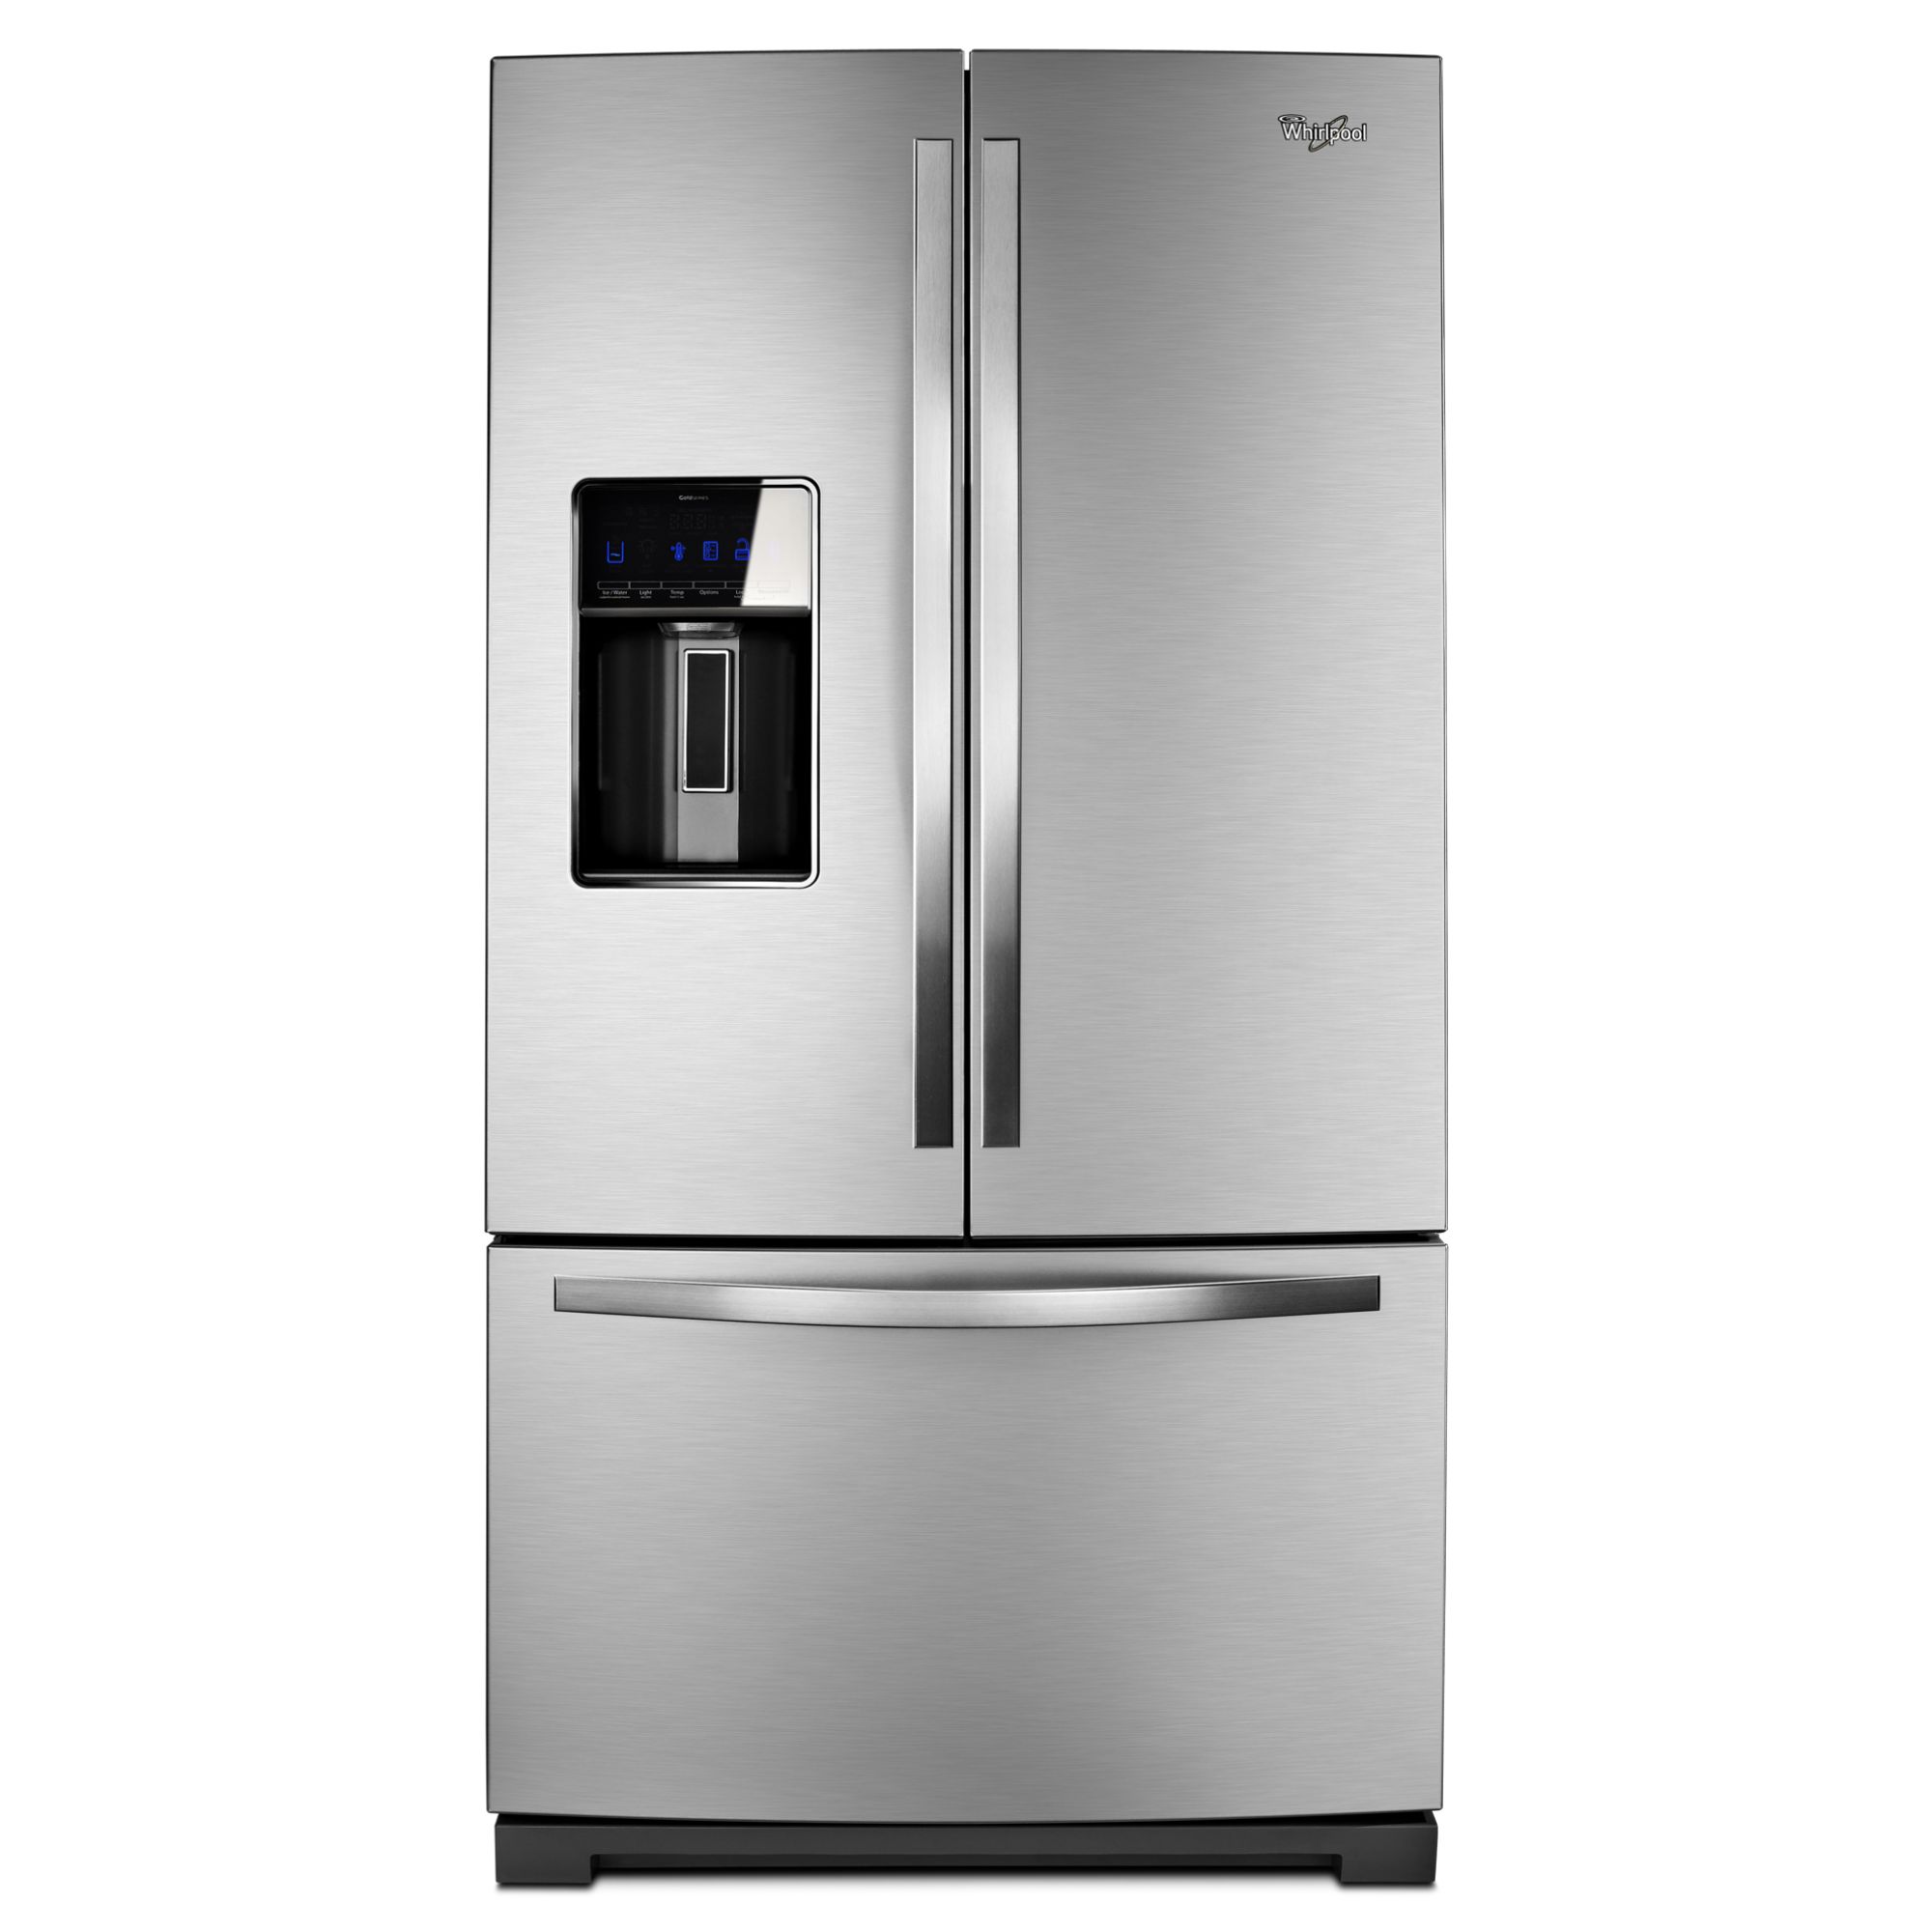 Whirlpool 28.6 cu. ft. French Door Refrigerator - Stainless Look